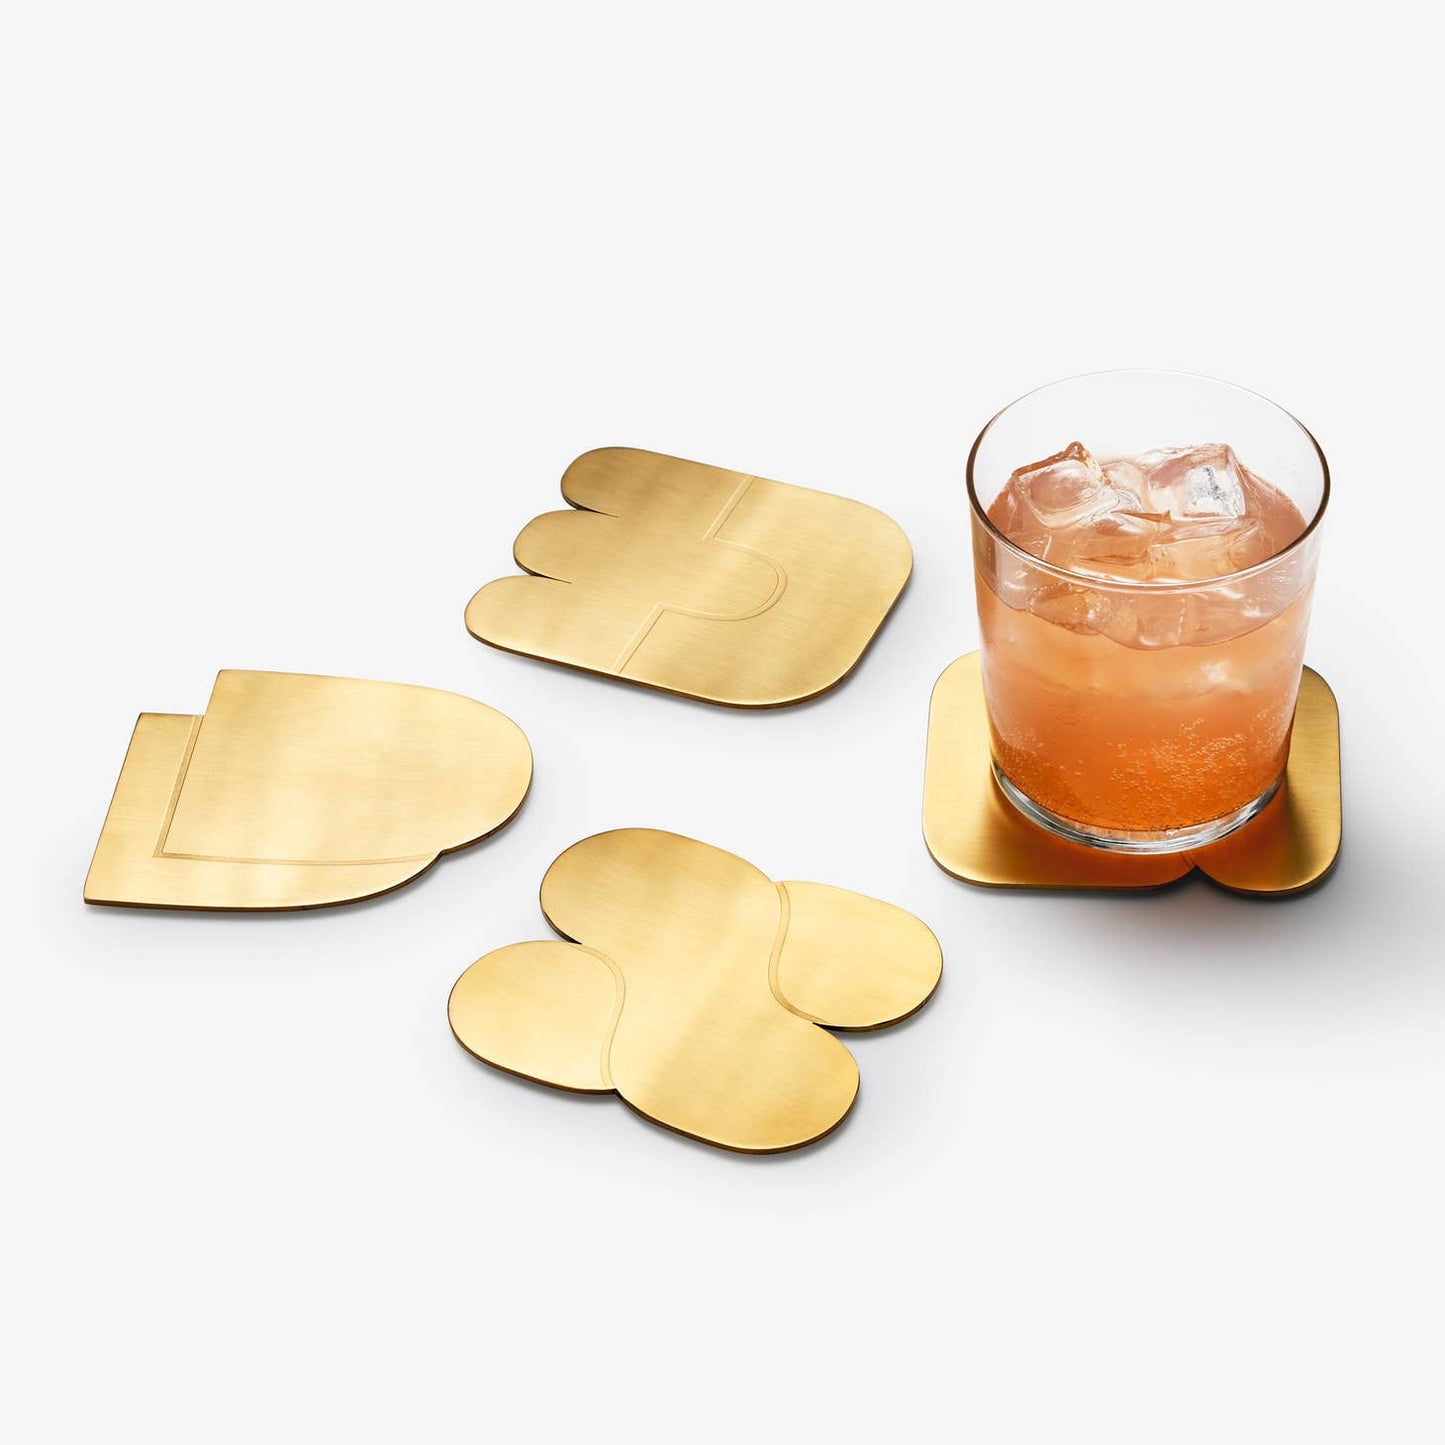 areaware together coasters / Set of four brass-plated coasters uses abstract, interlocking shapes to signify connection and togetherness. The weightiness of the brass ensures none of those sticking-to-your-cup situations when picked up, & designed to protect your surfaces from watermarks and scratches. 